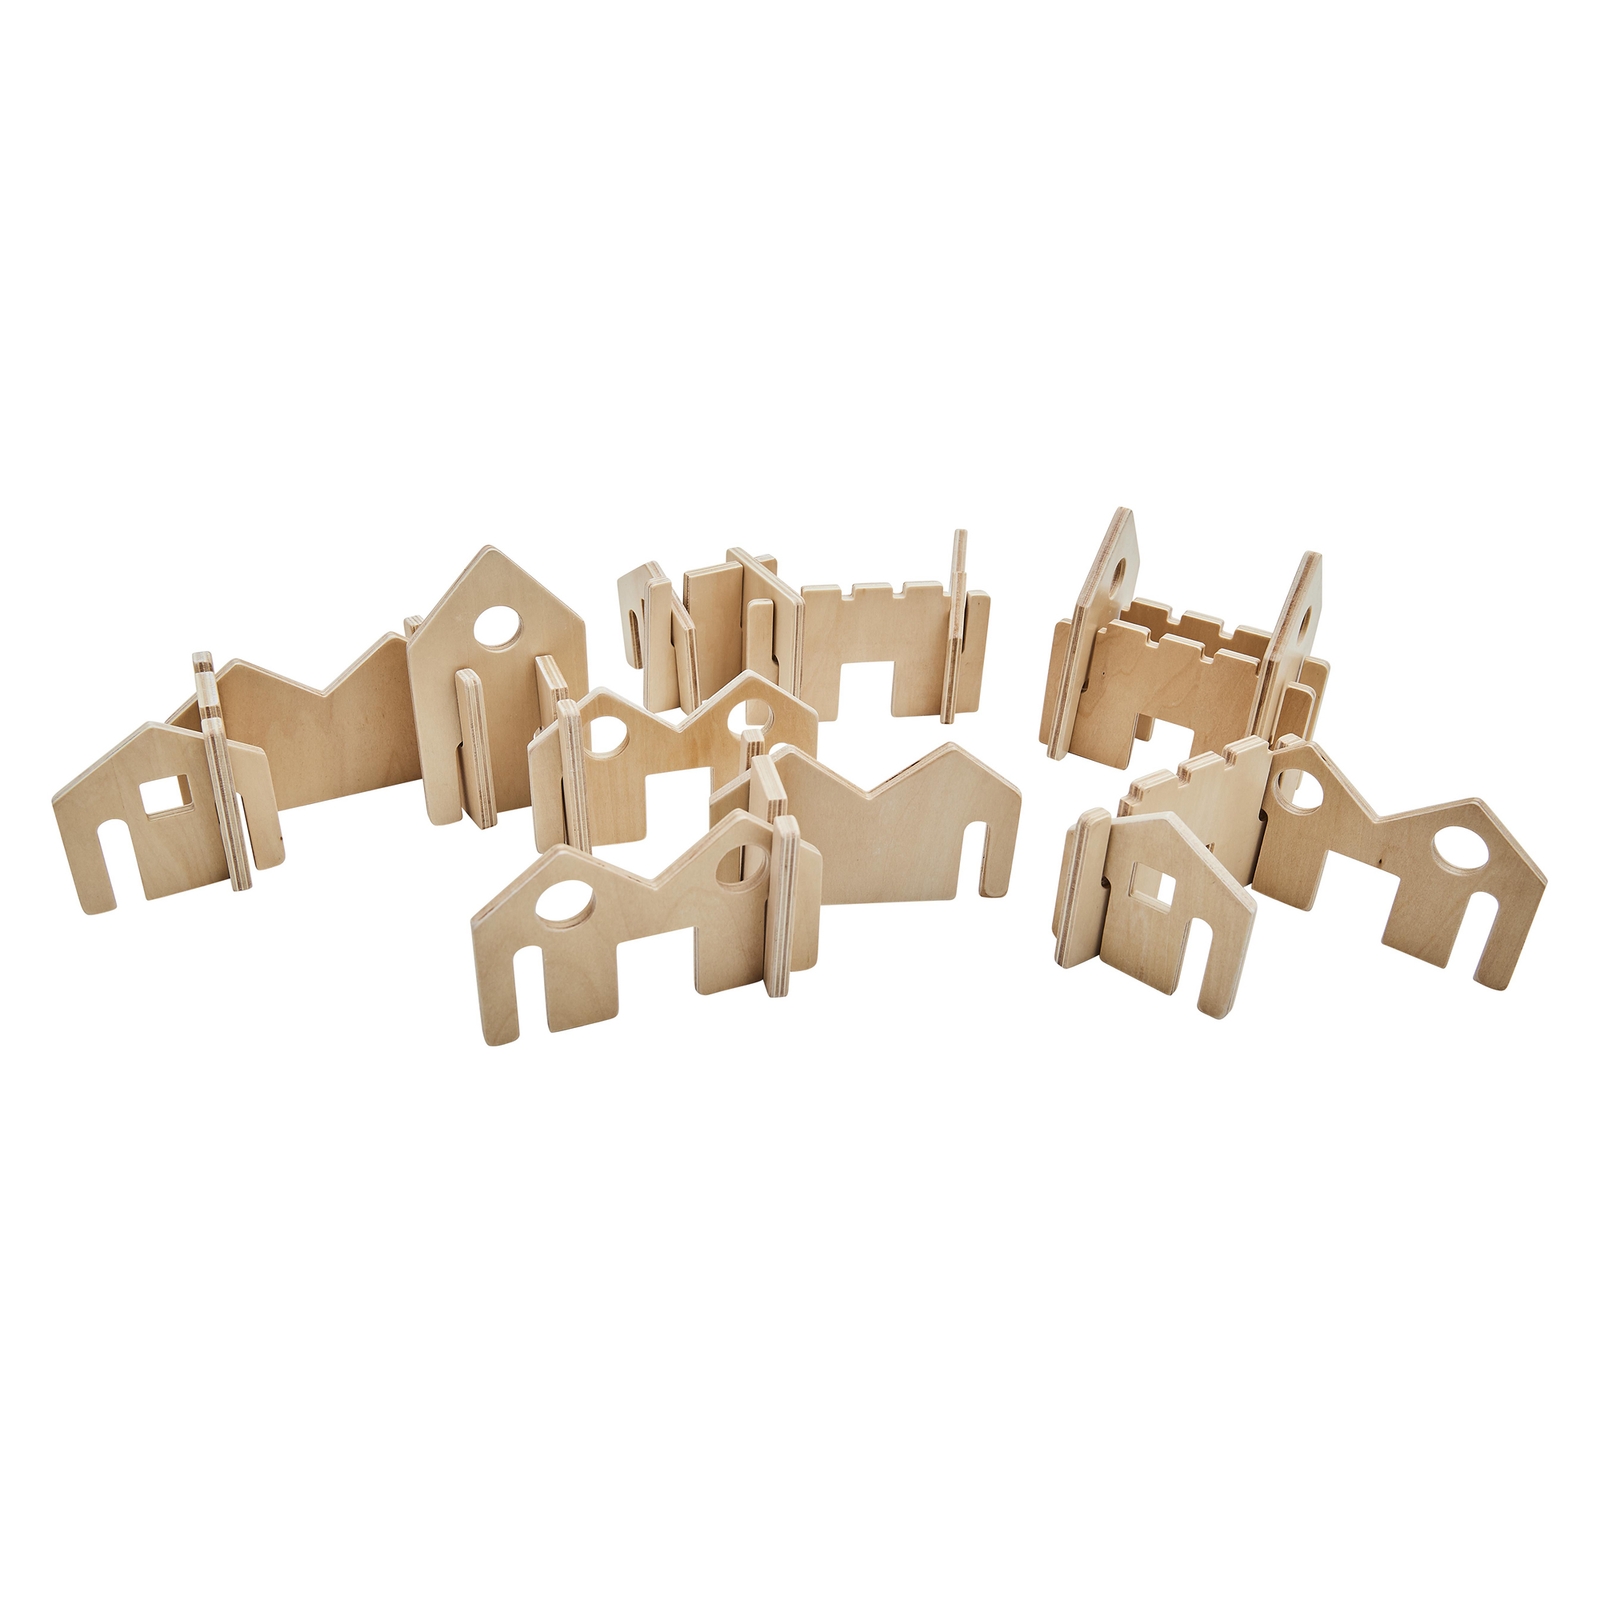 The Little Architect - Pack of 22